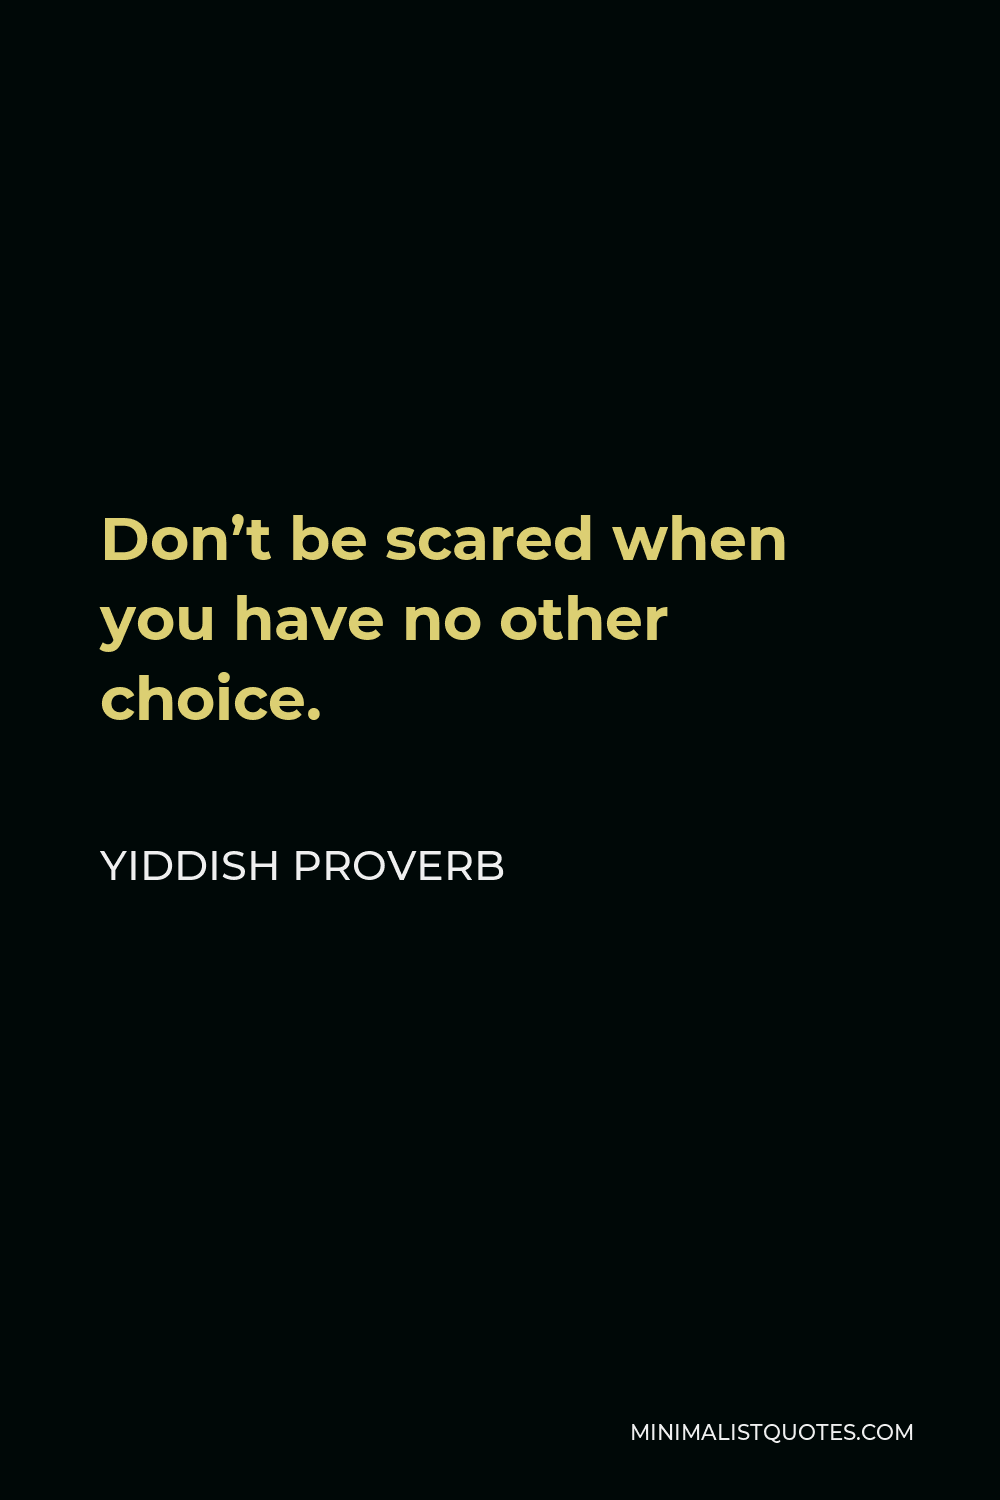 Yiddish Proverb Quote - Don’t be scared when you have no other choice.